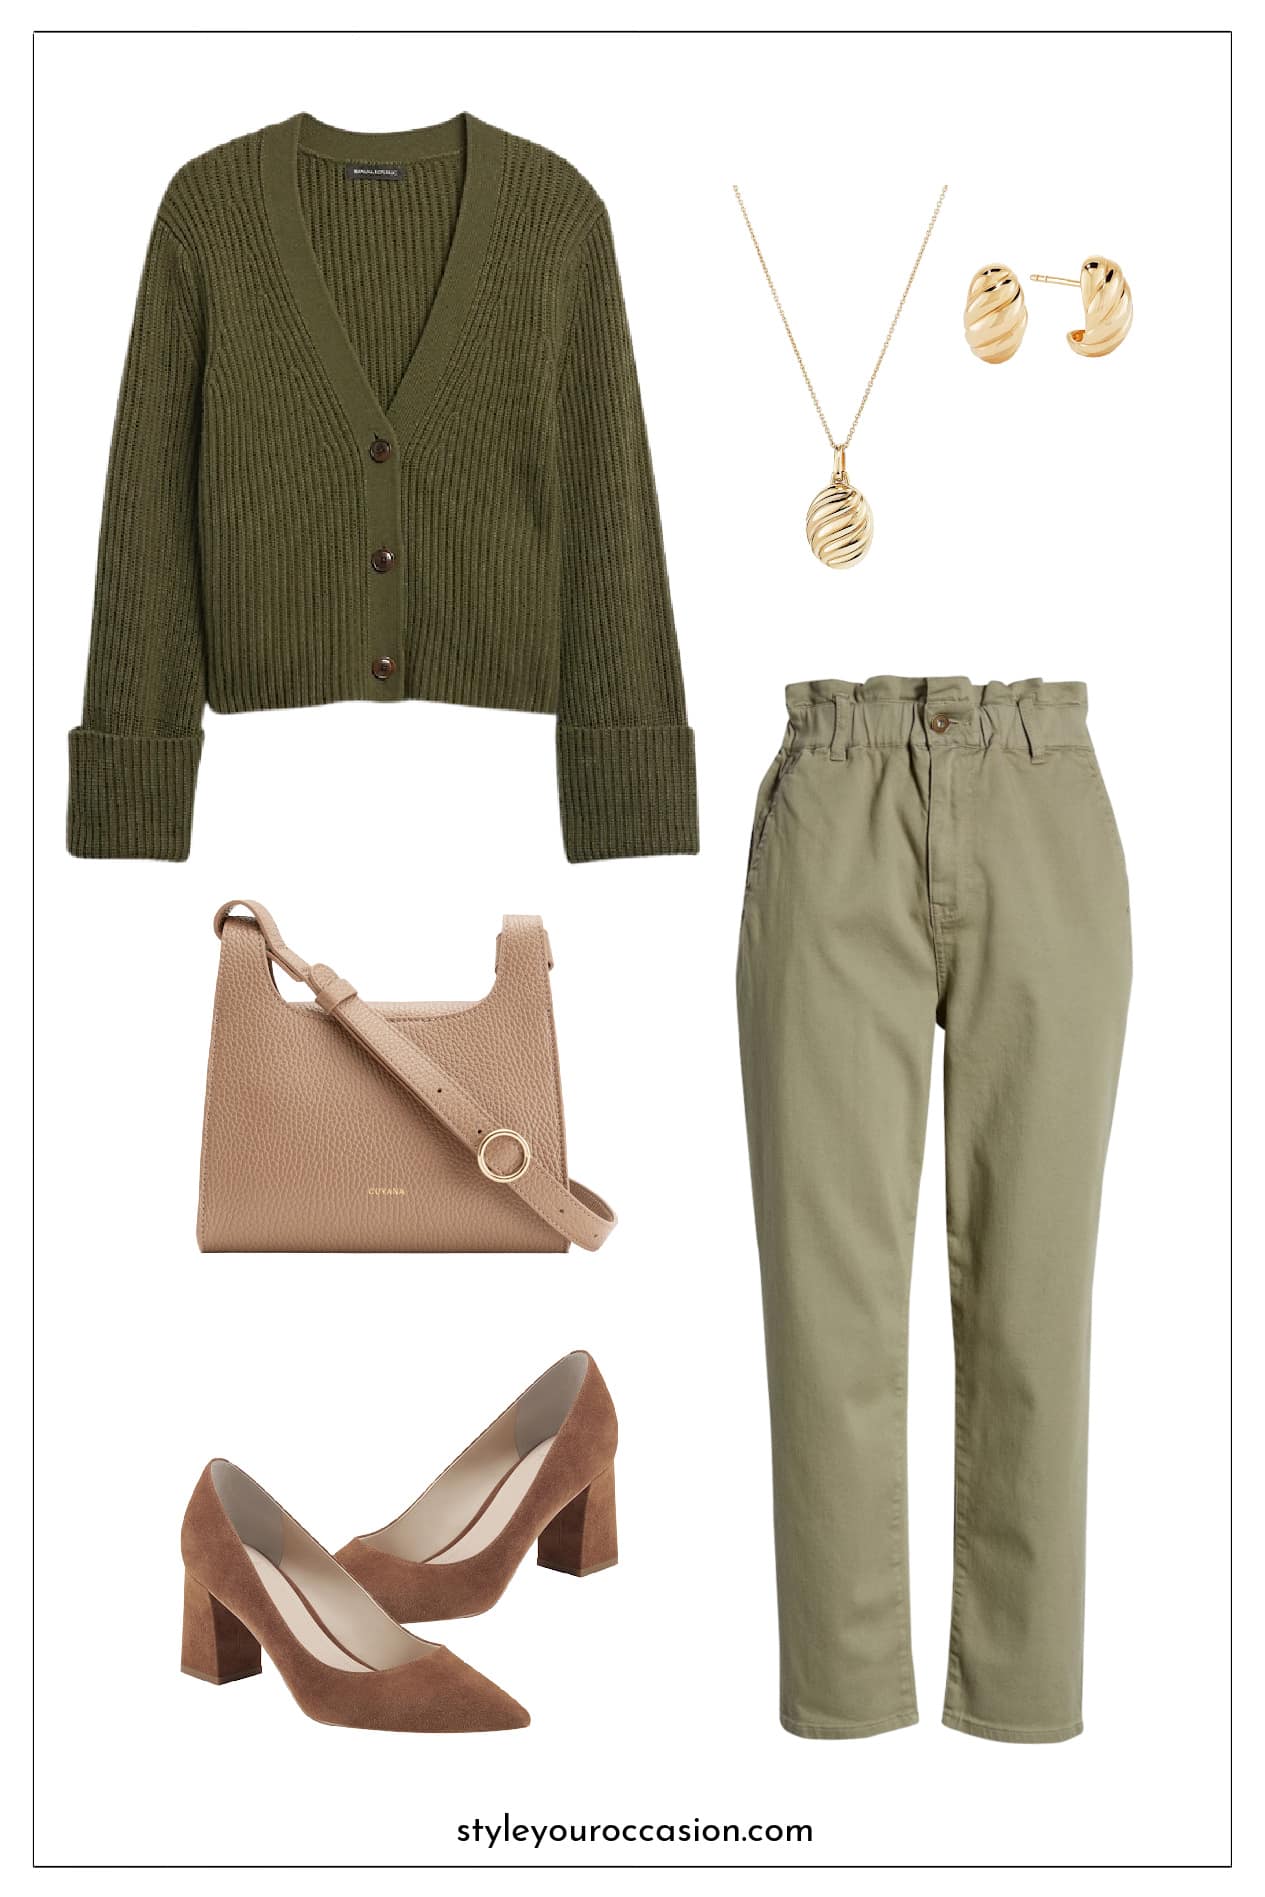 image of a style mood board with an outfit with green pants, a green knit cardigan, a nude bag, brown suede heels, and gold jewelry